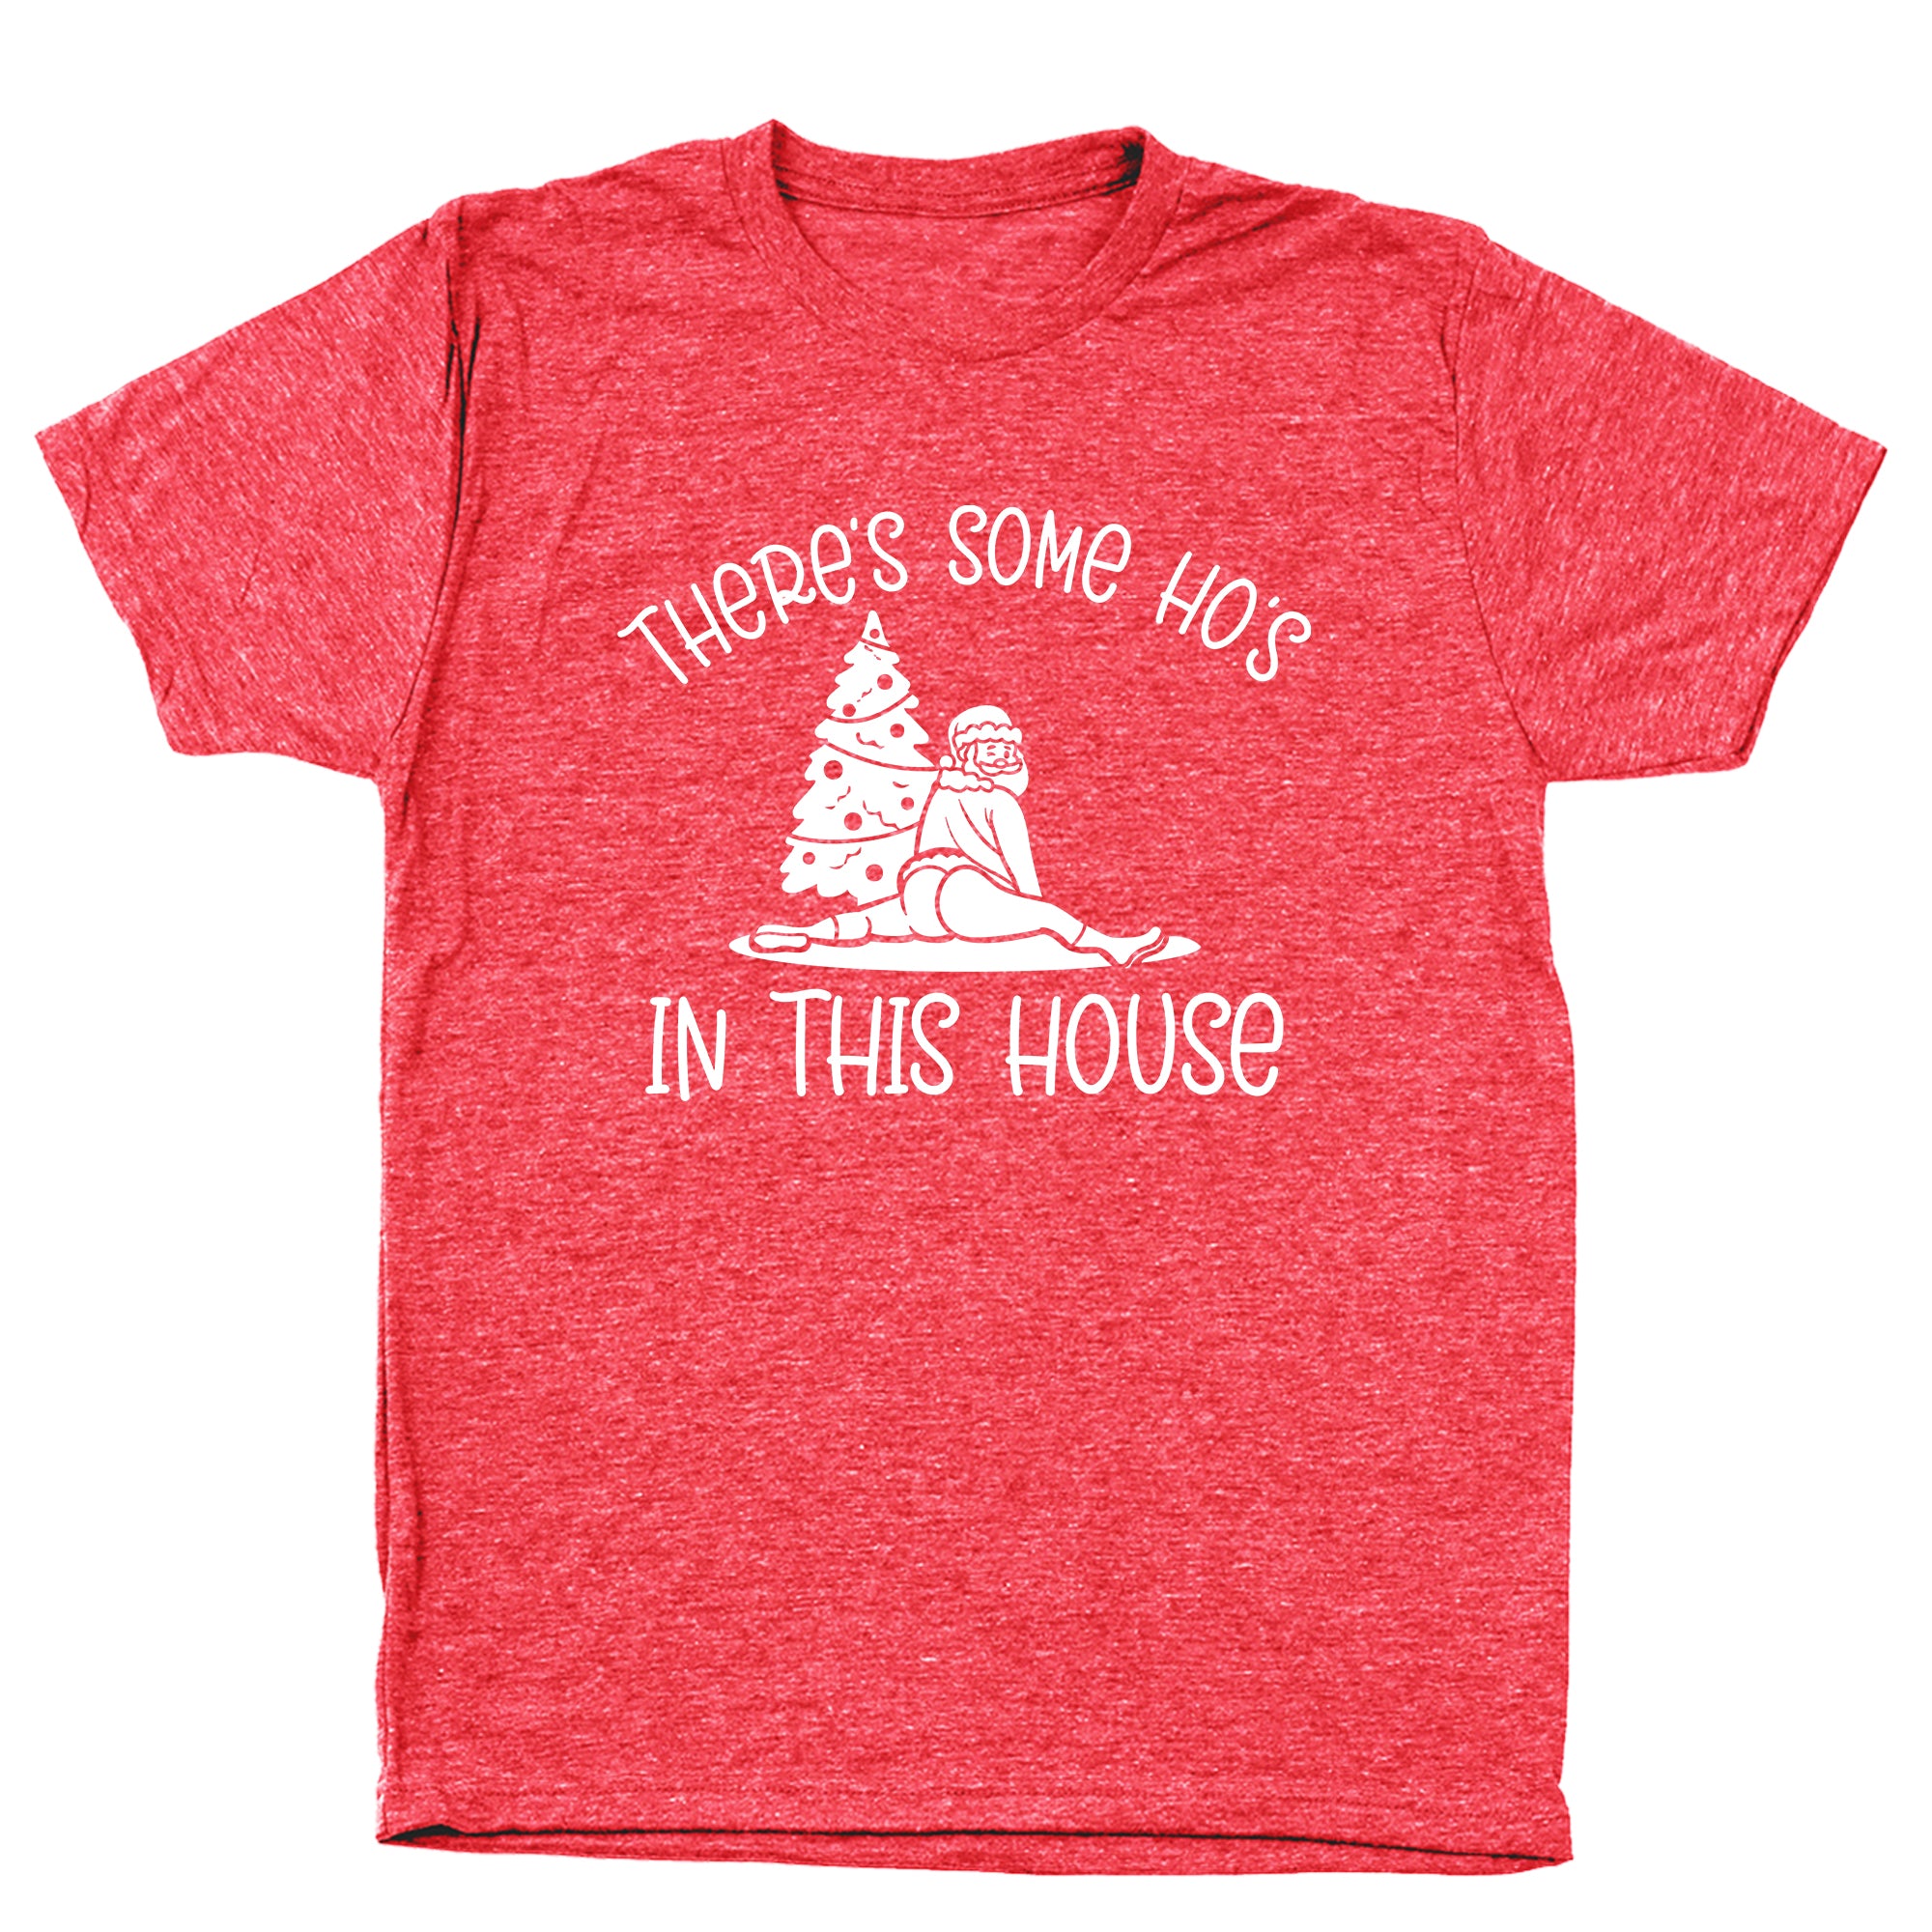 There's Some Hos In This House Tshirt - Donkey Tees